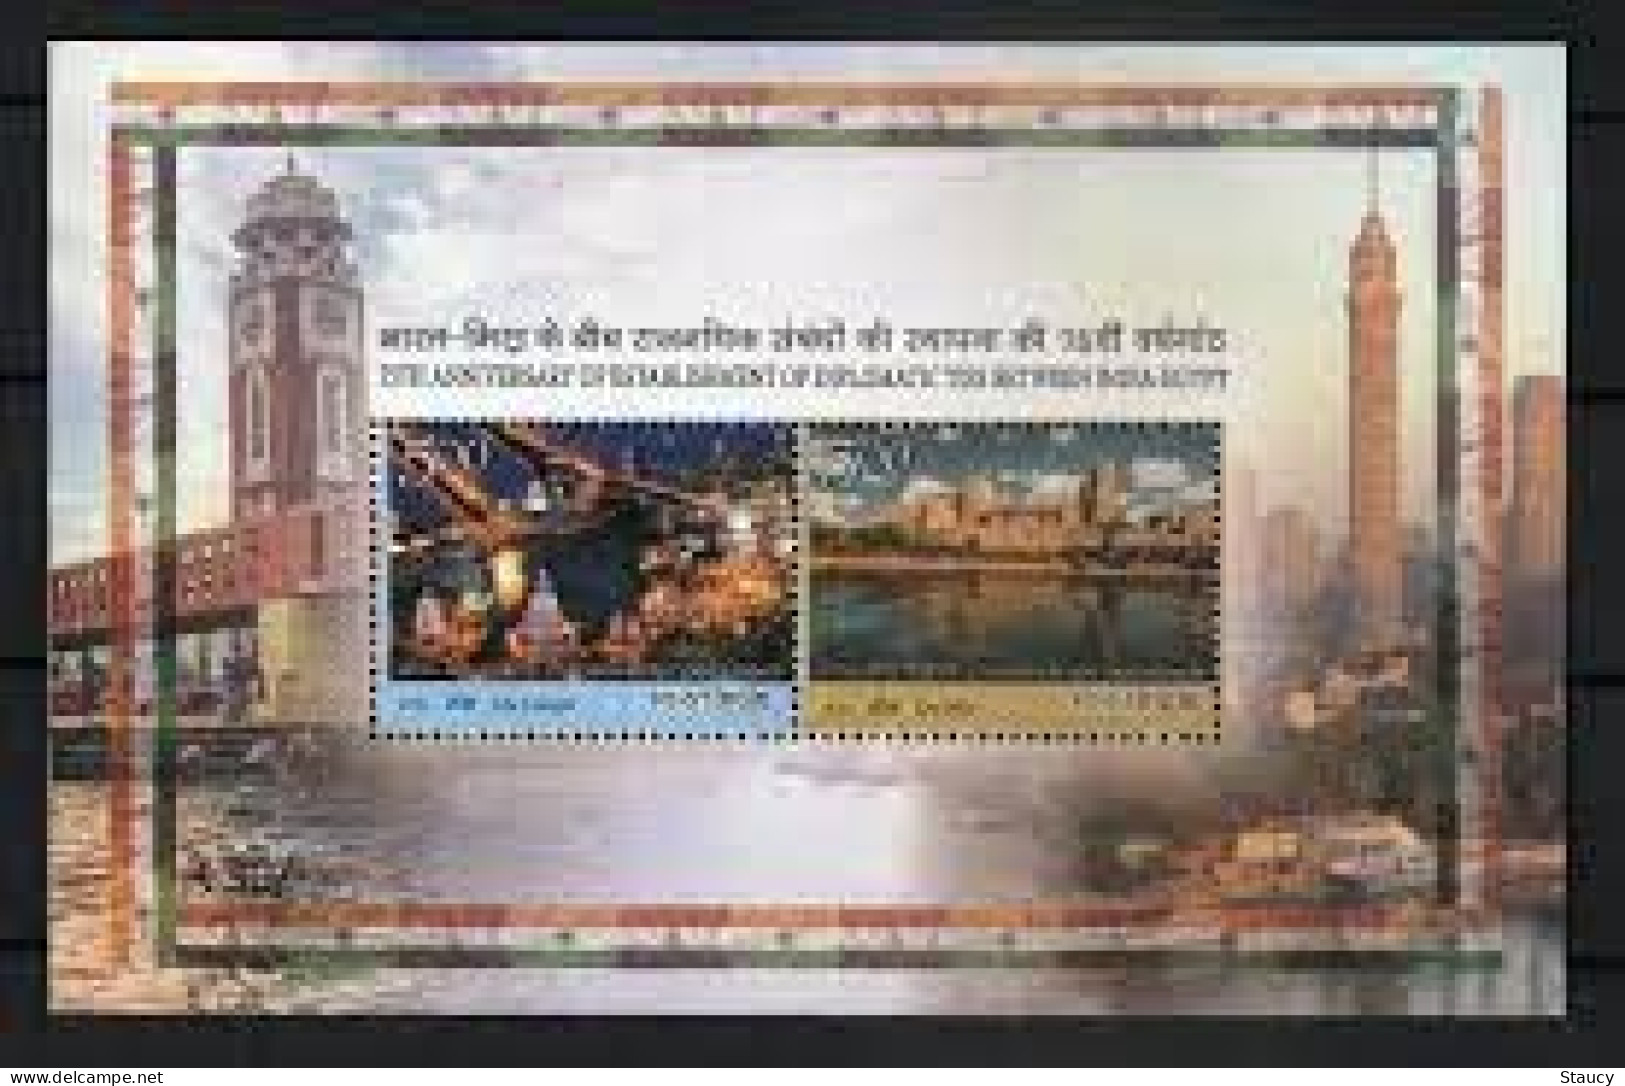 India 2023 Complete Year Collection Of 11 MS / SS MNH Year Pack As Per Scan RARE To Get - Annate Complete